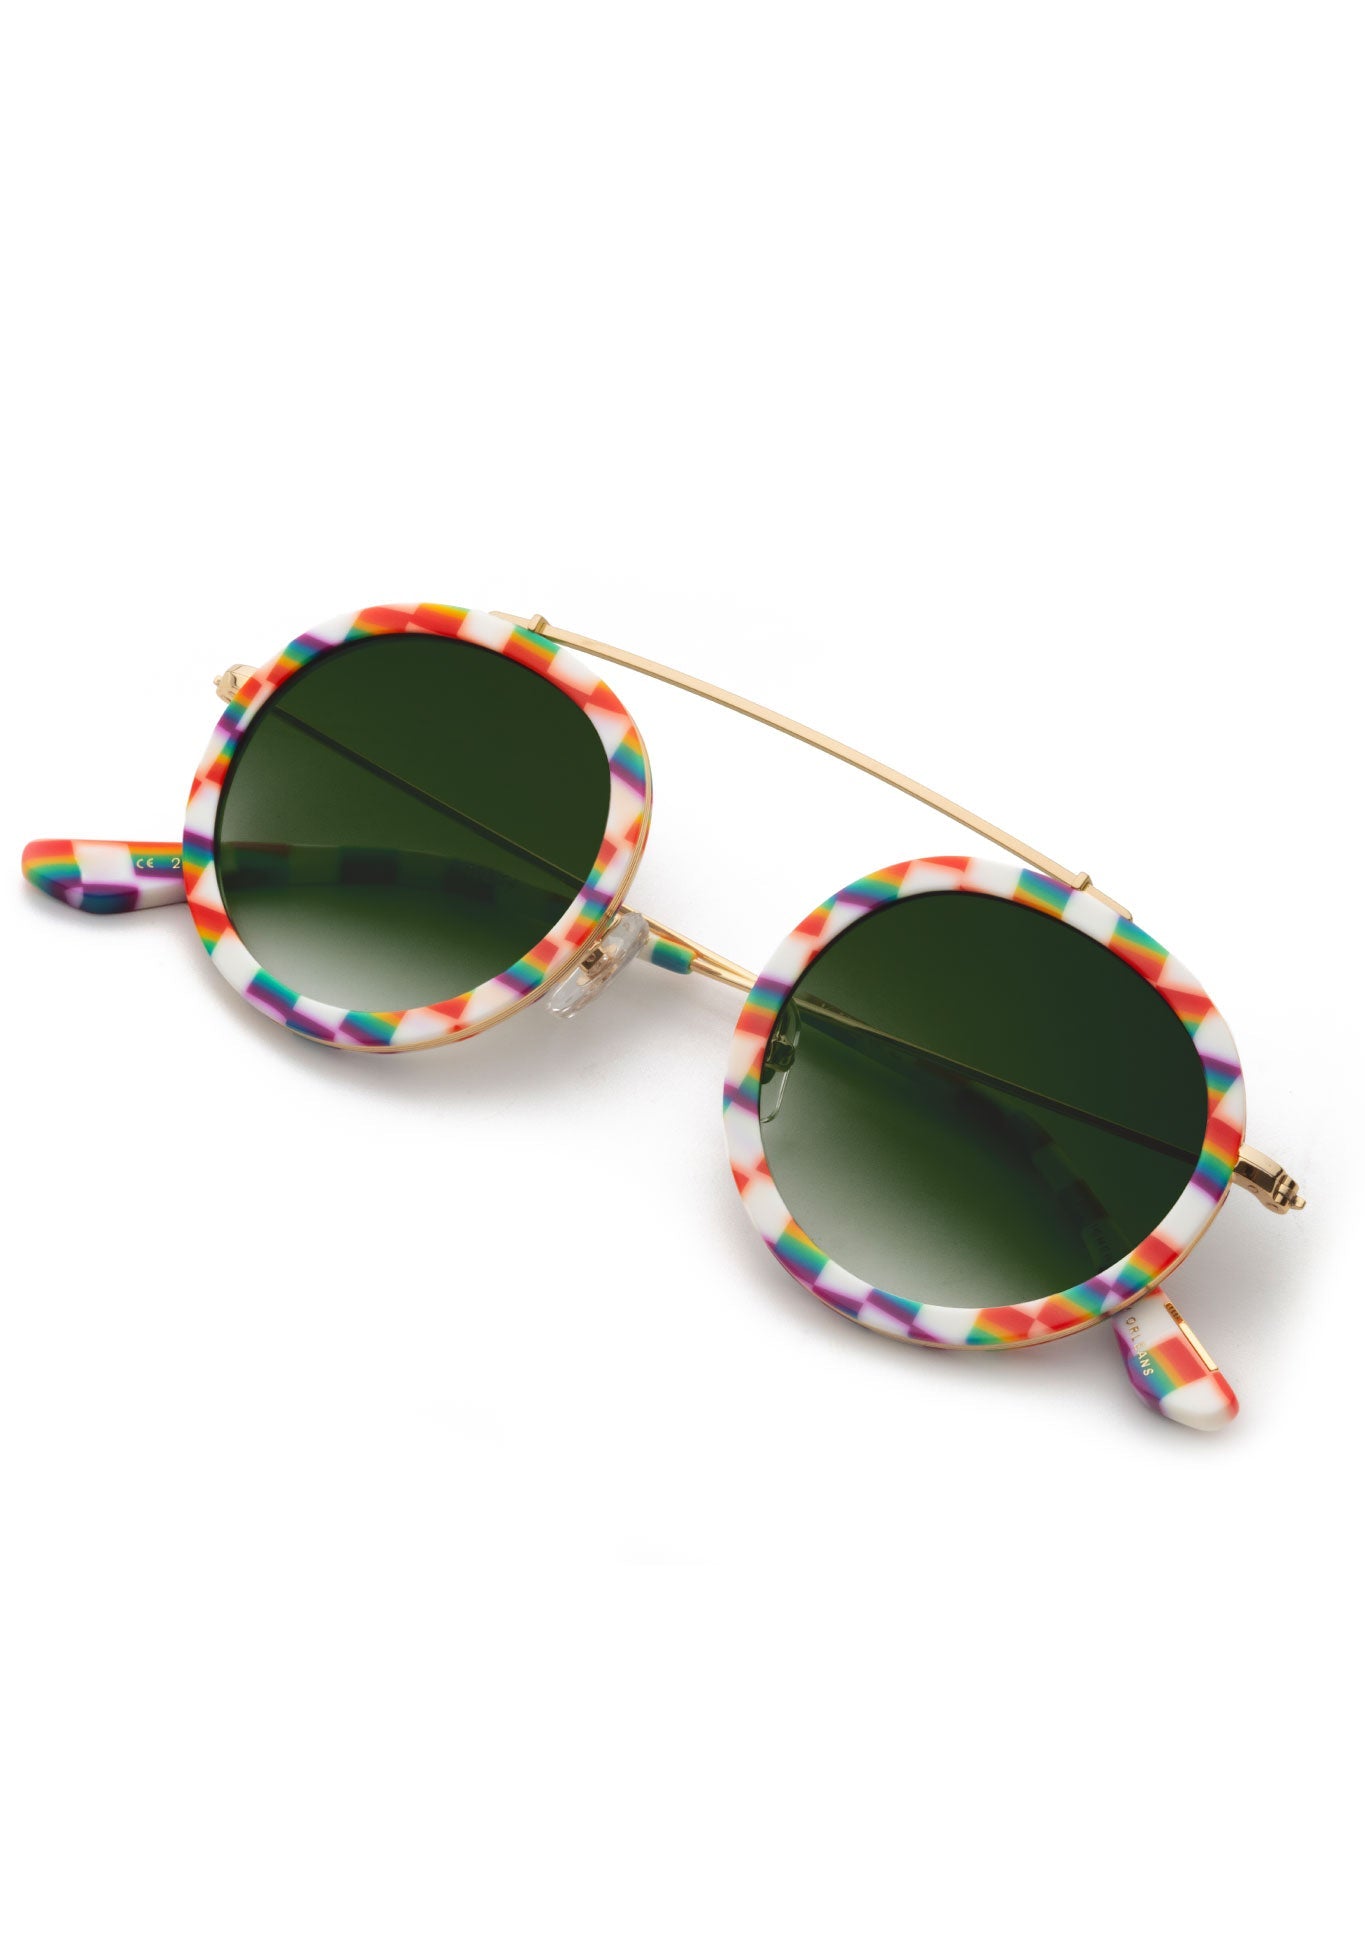 KREWE SUNGLASSES - CONTI | Amore 18K Handcrafted, rainbow checkered acetate limited addition gay pride collection sunglasses